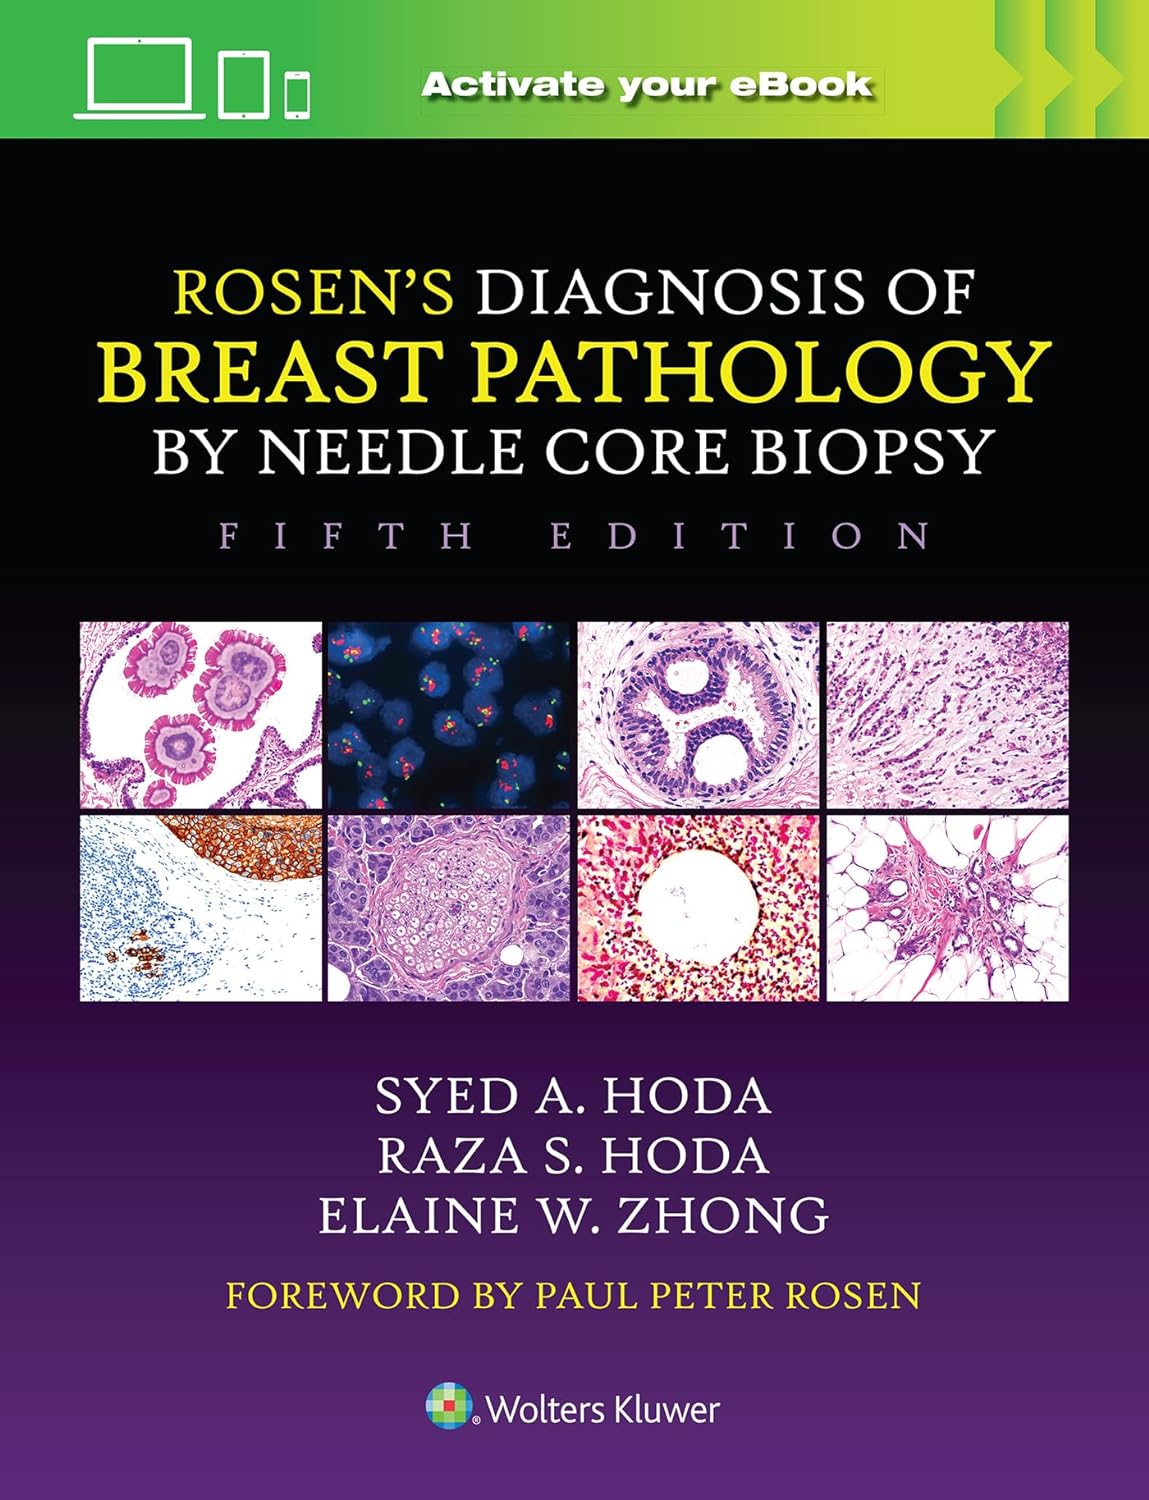 Rosen's Diagnosis of Breast Pathology by Needle Core Biopsy Fifth Edition